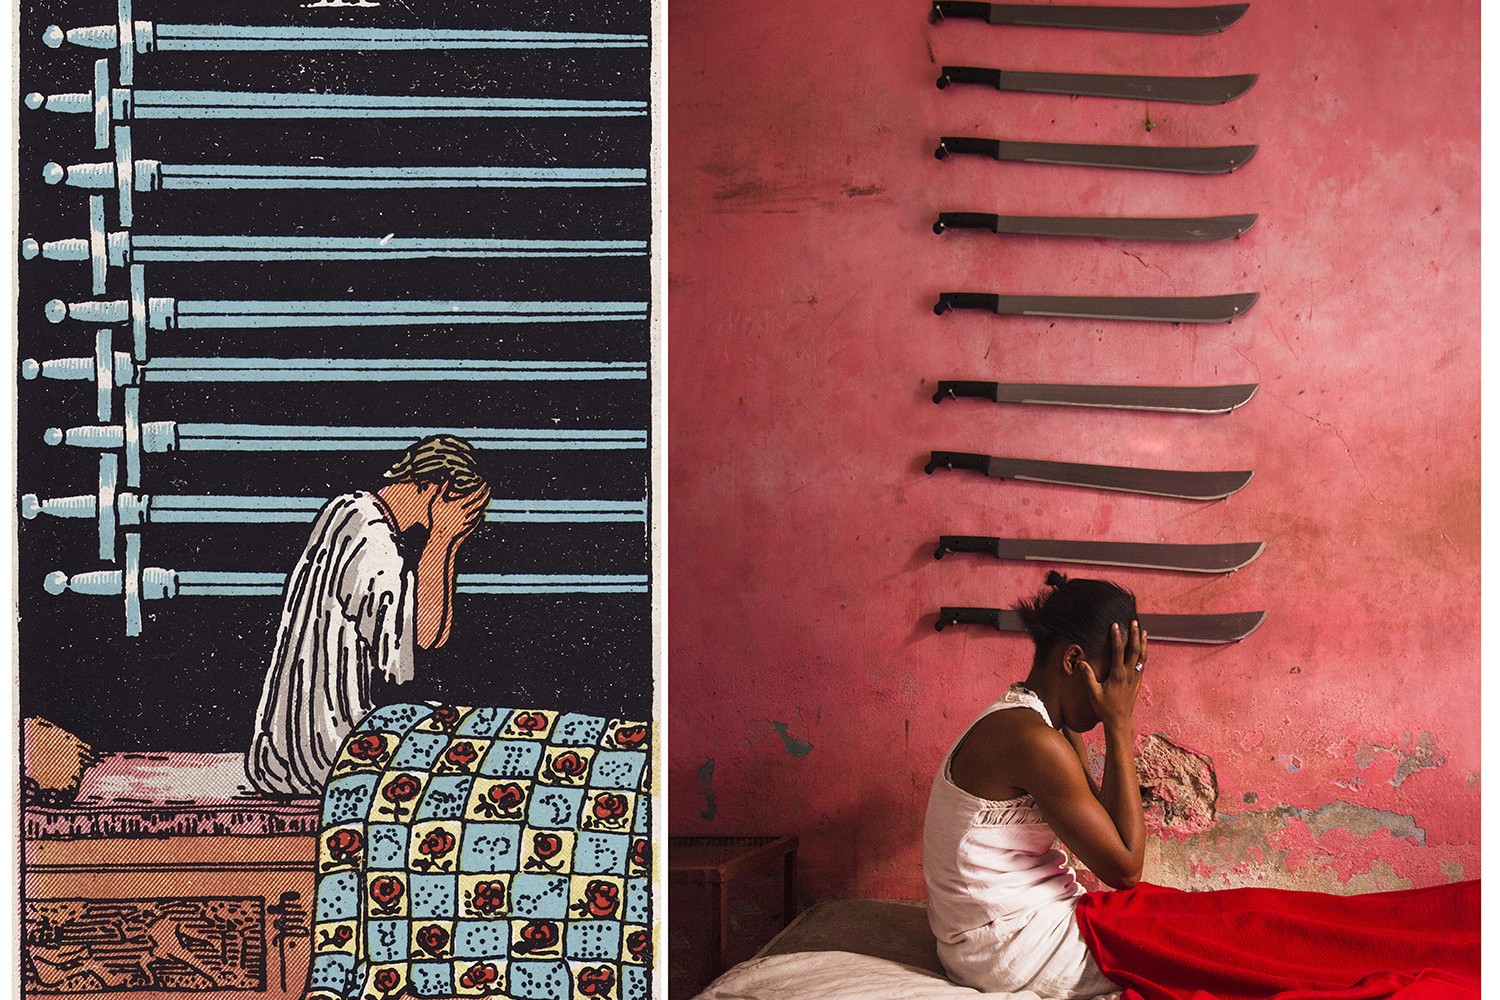 Photographer Teams Up With Haitian Artists to Transform Tarot Cards Into Real Scenes